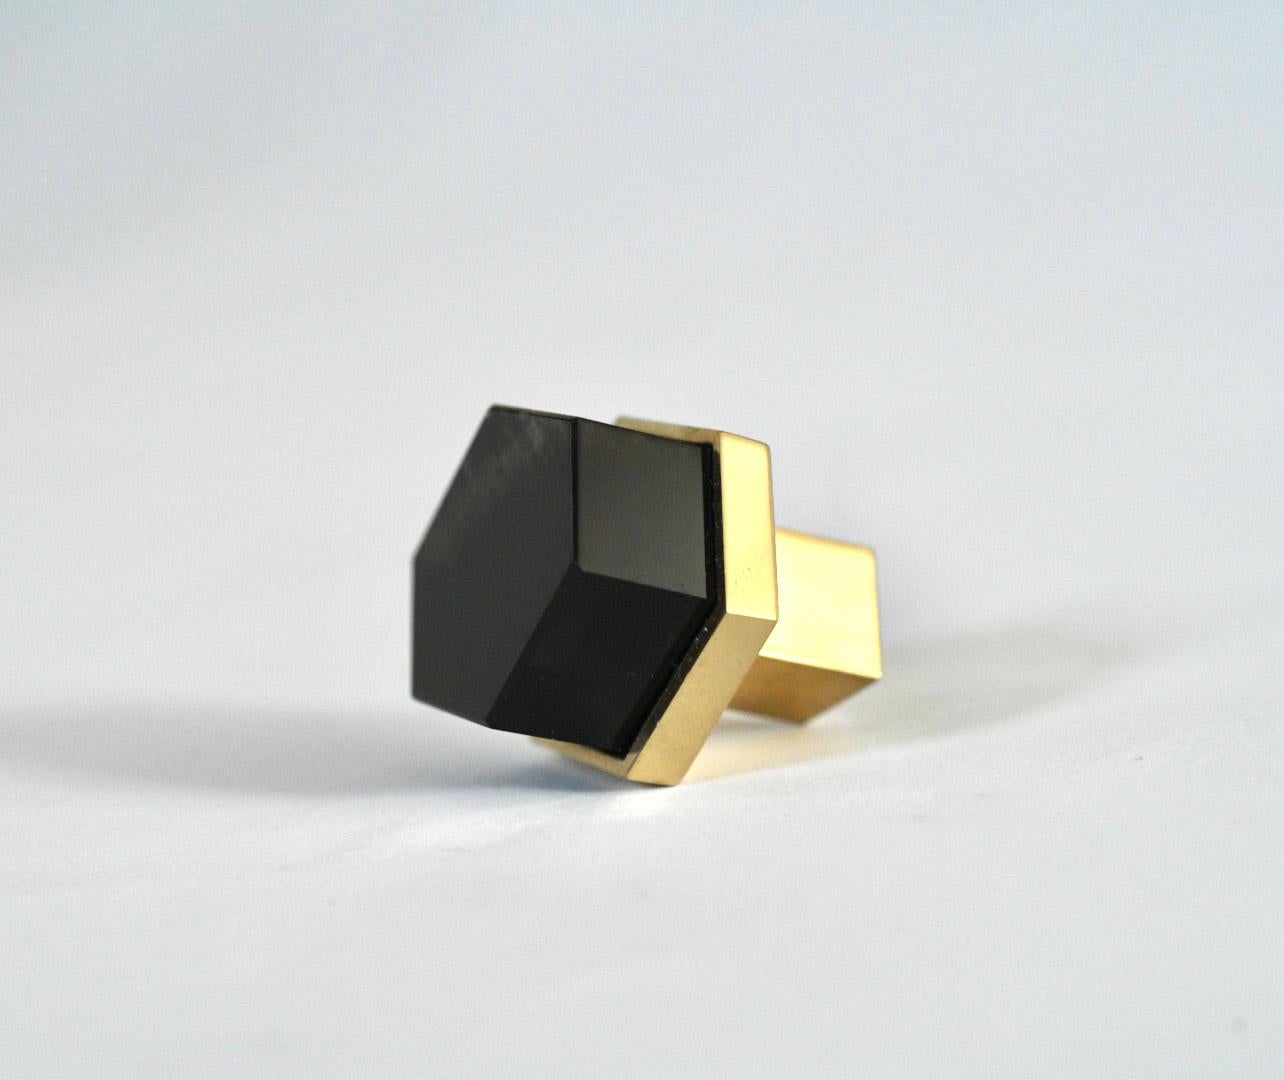 Flat hexagon form smoky rock crystal quartz knob with polished brass base. Created by Phoenix Gallery, NYC.
Custom size and finish upon request.